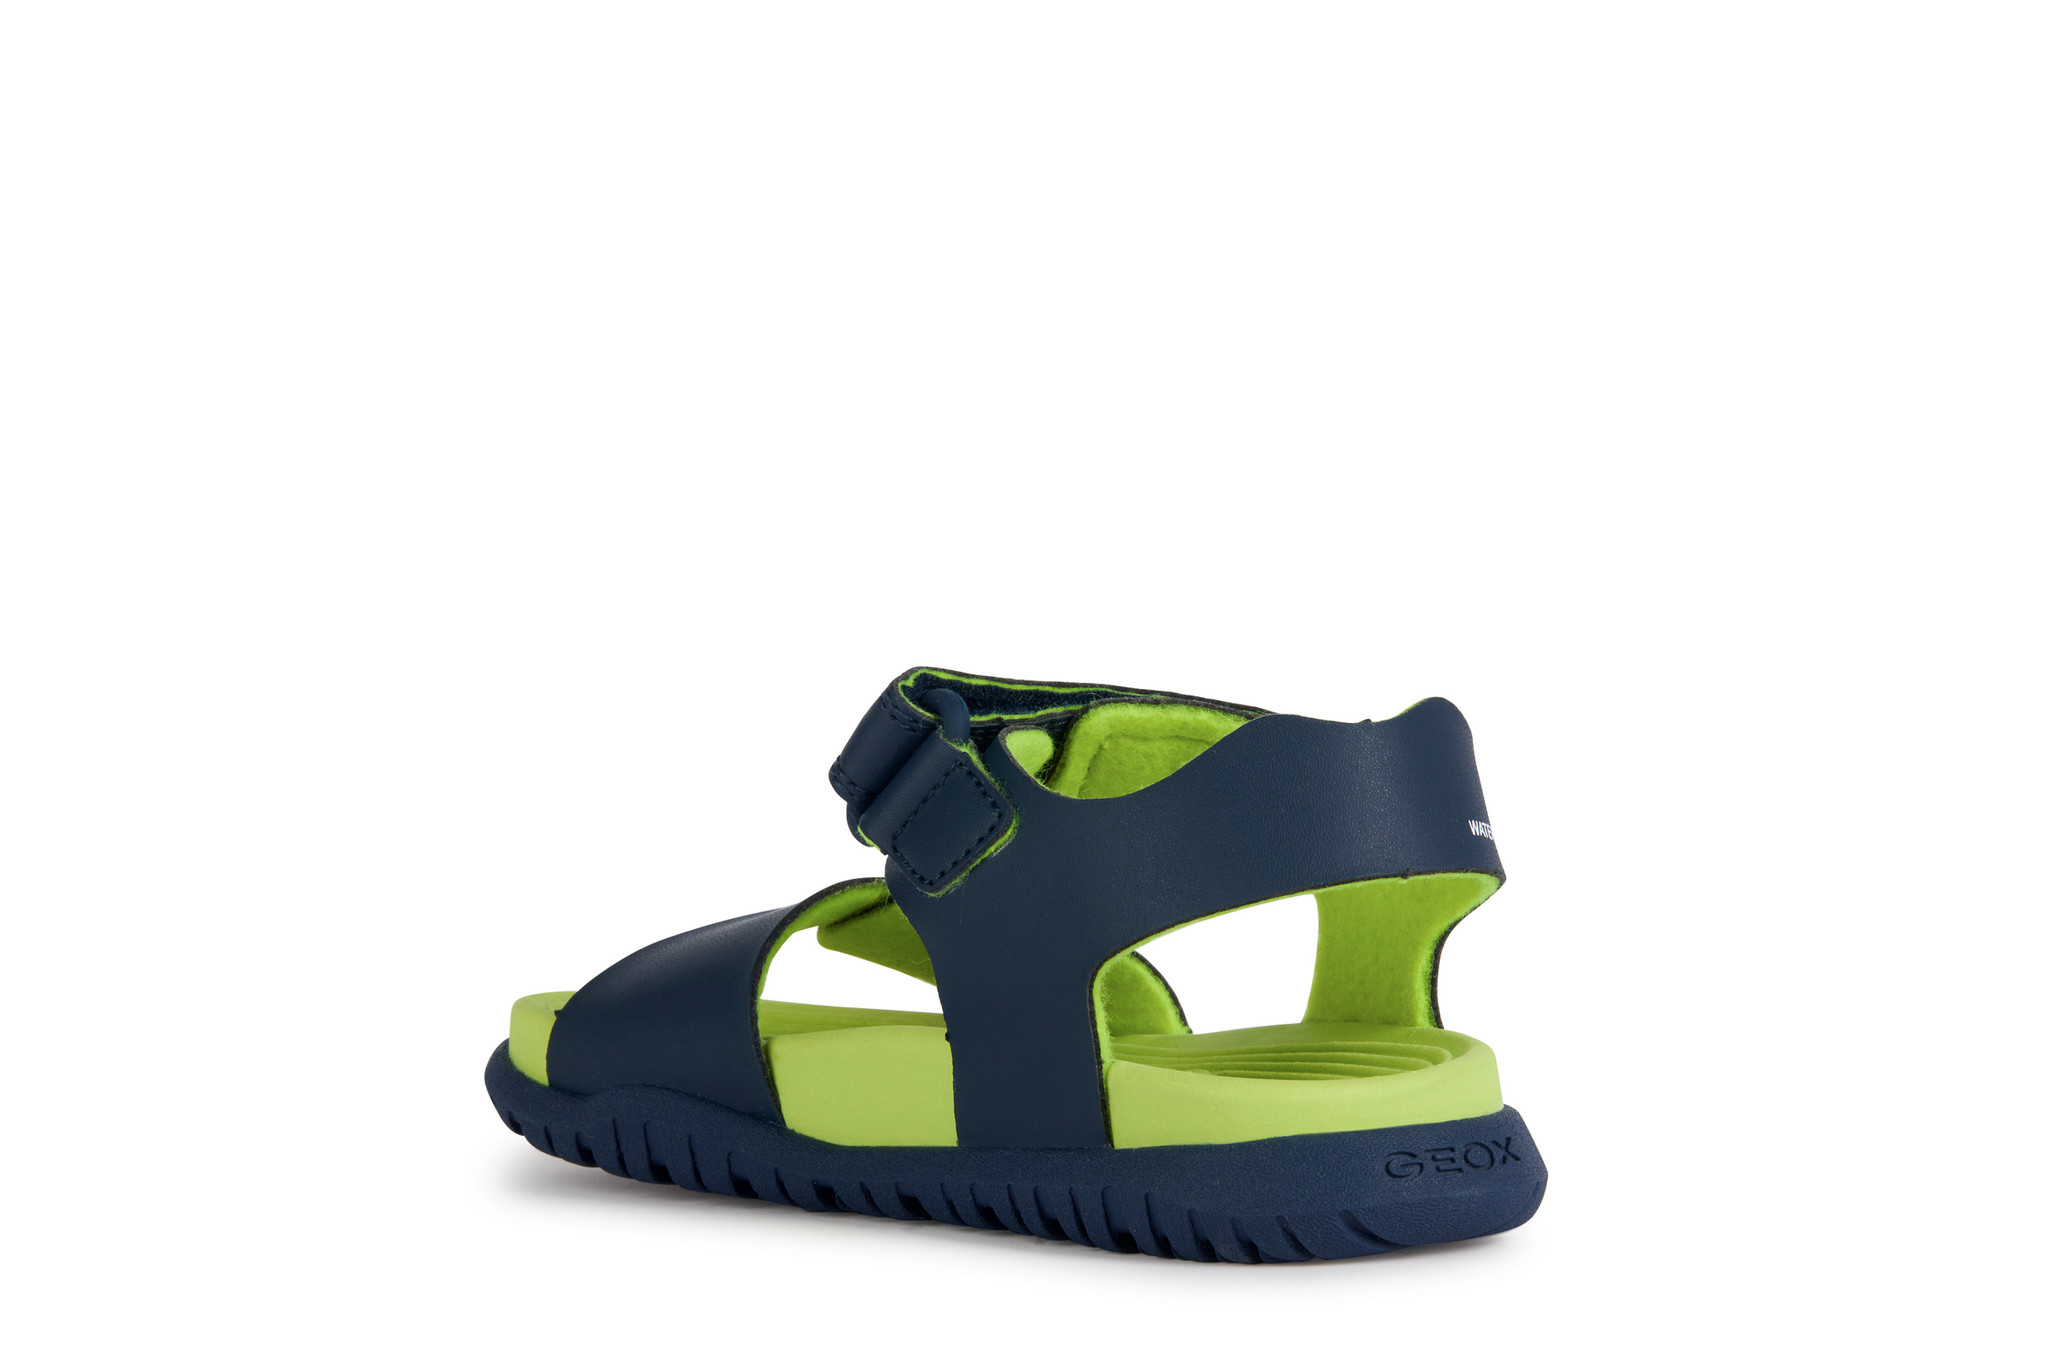 Geox Fusbetto Navy/Lime